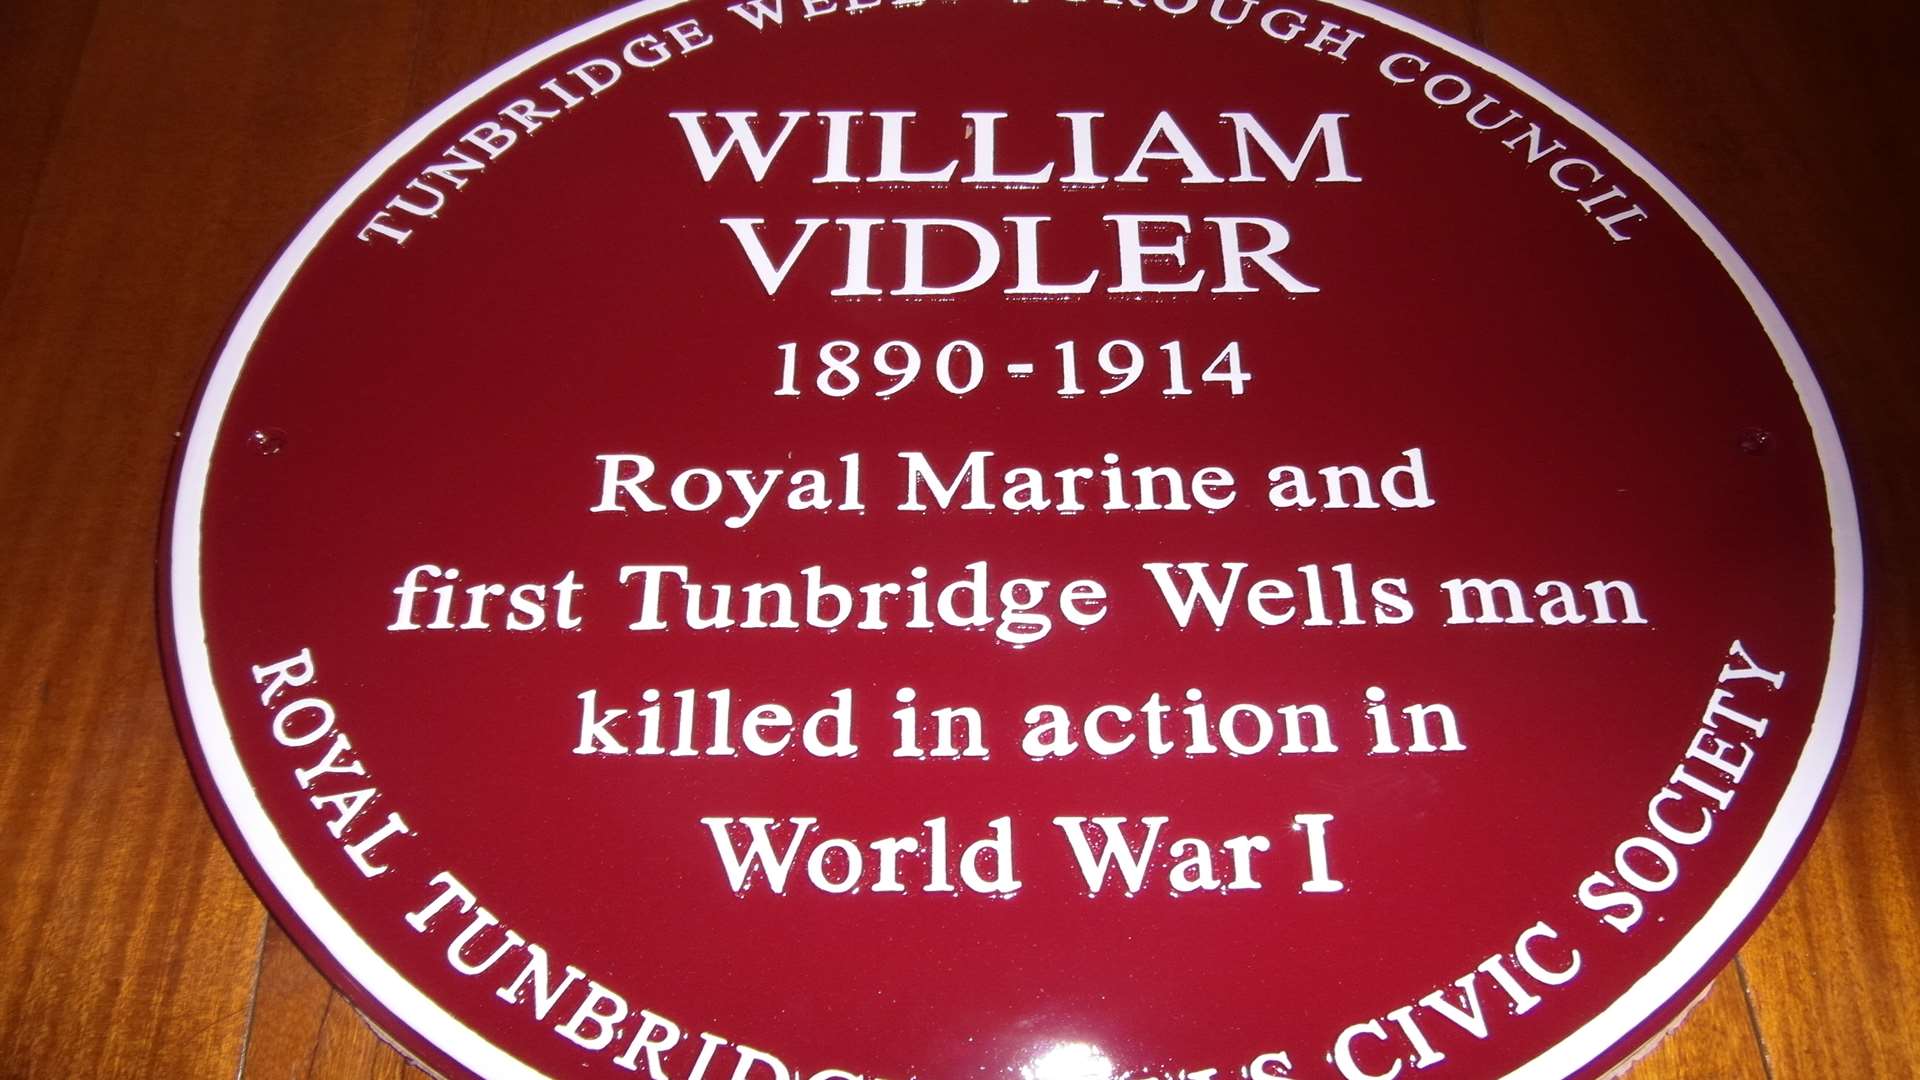 William Vidler was the first local resident to die in the First World War